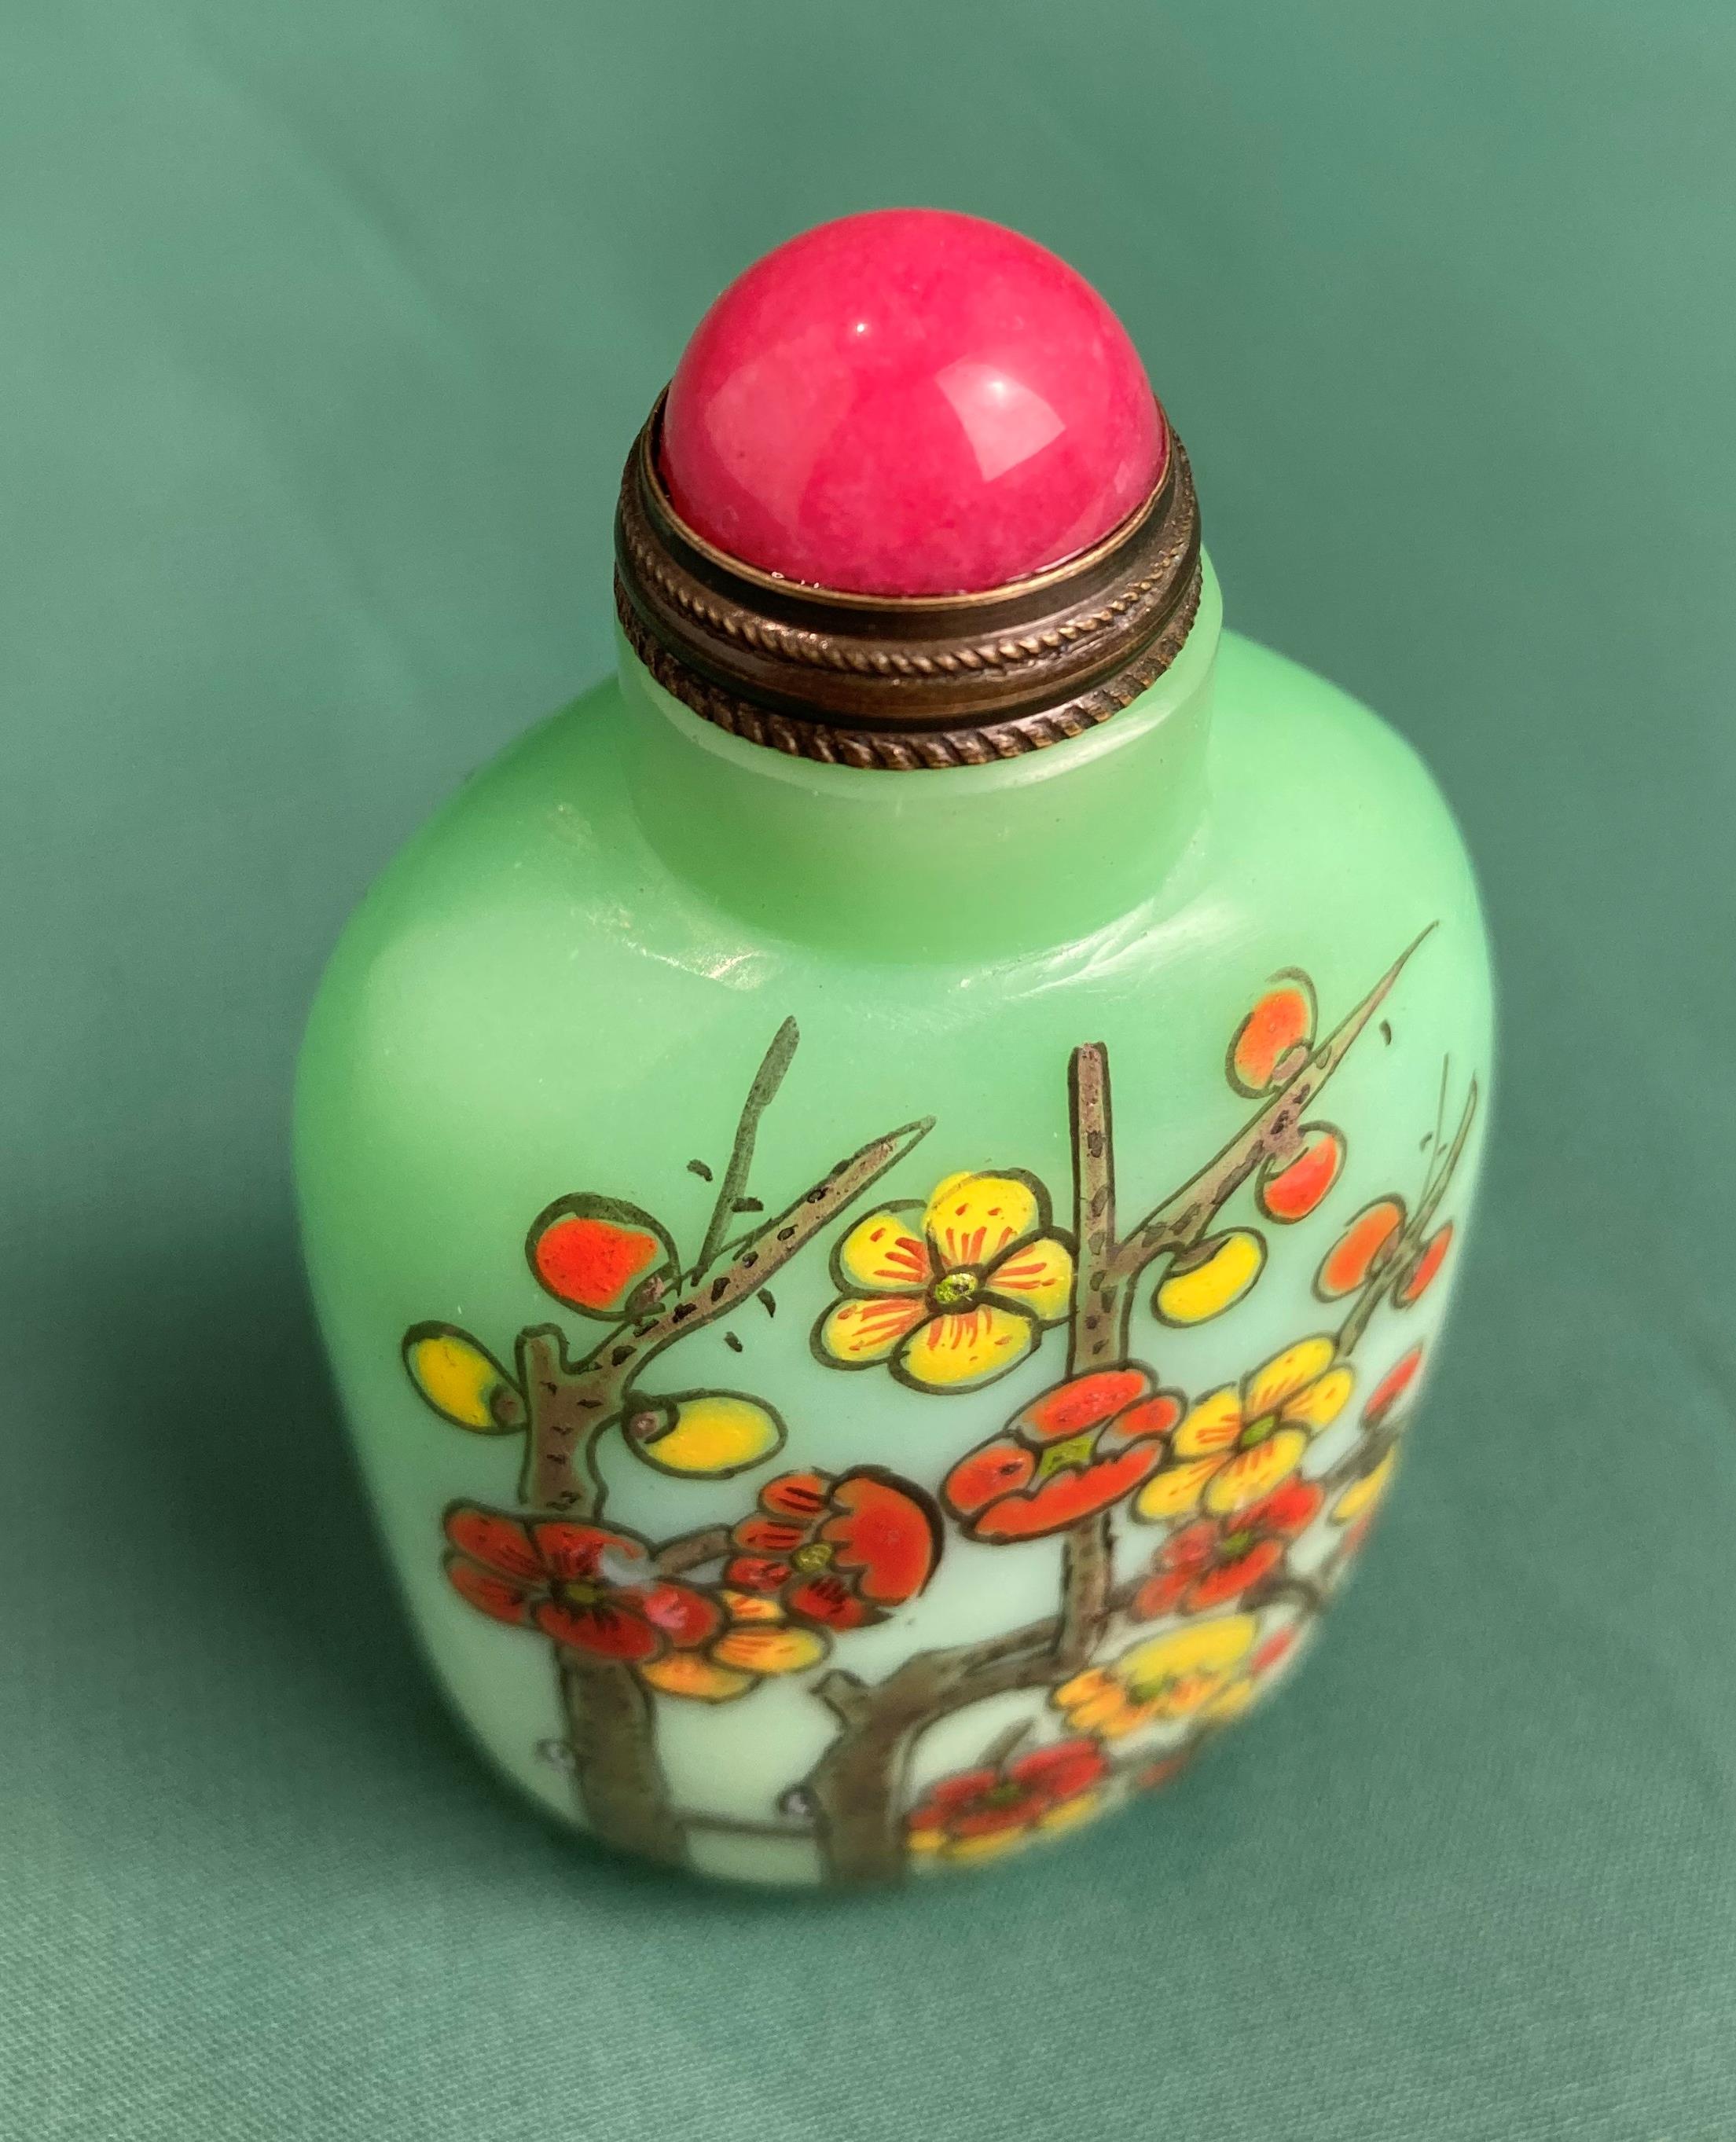 Oriental green glass hand-painted snuff bottle with spoon and stopper decorated with floral design - Image 4 of 5